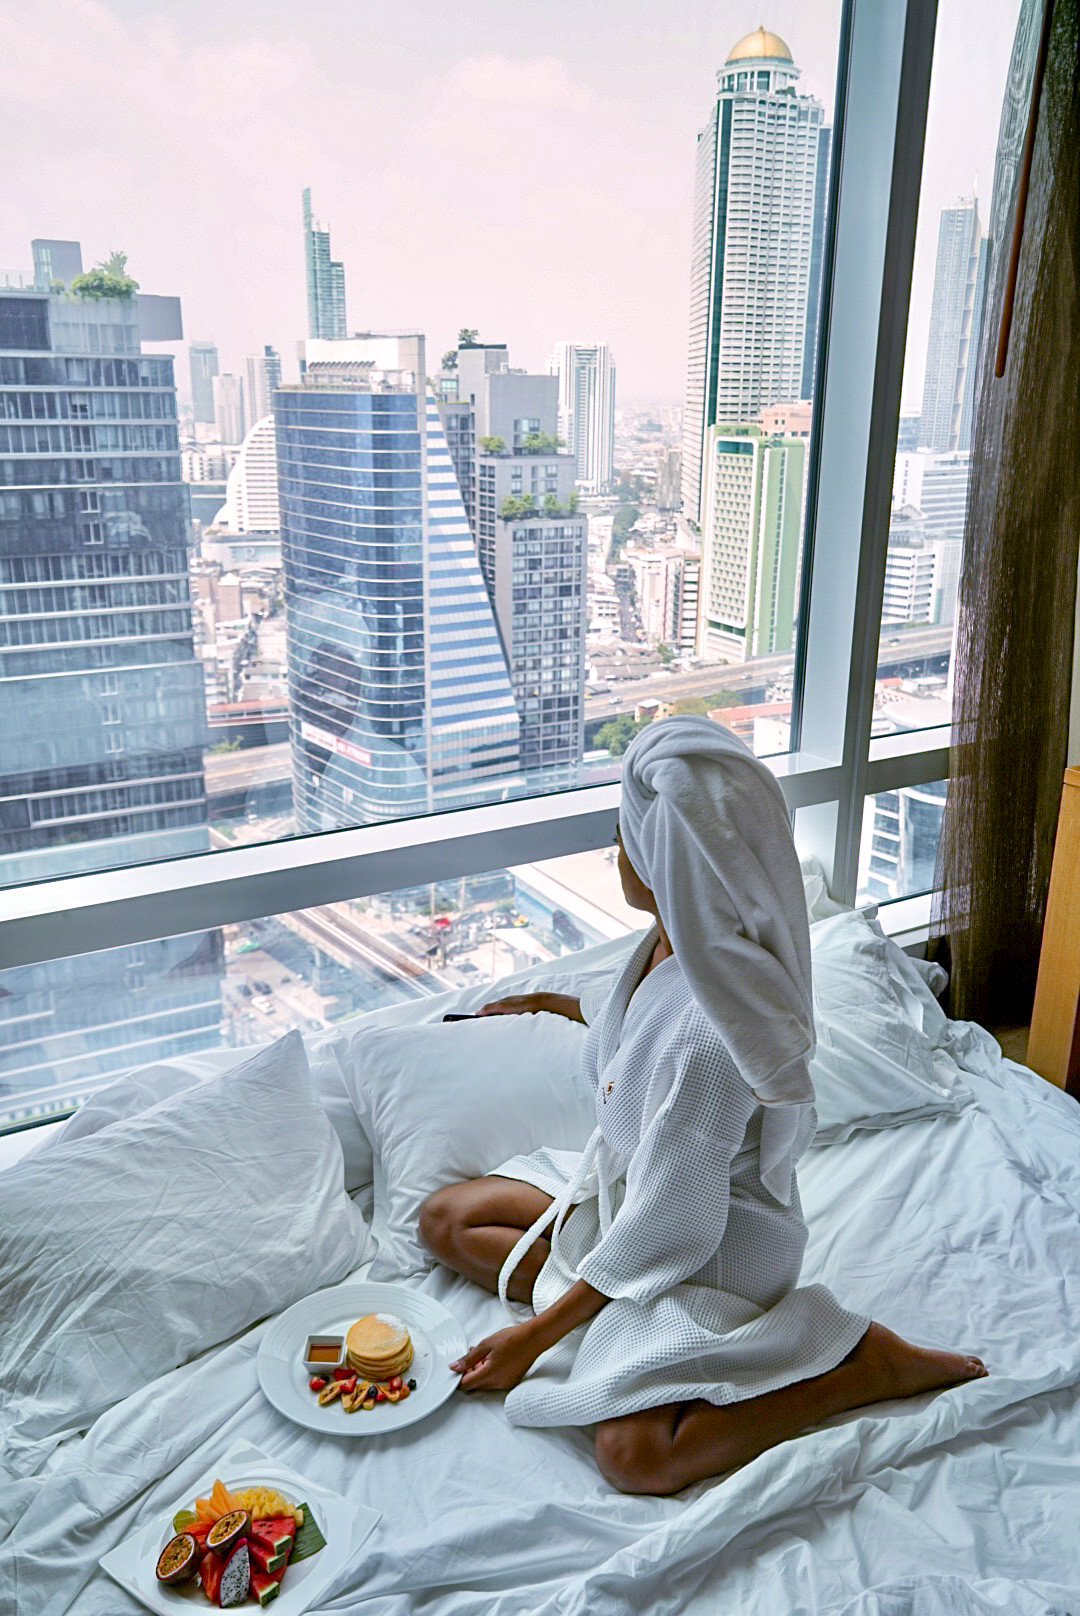 Hotel with a view: Staying at the Eastin Grand Sathorn Bangkok